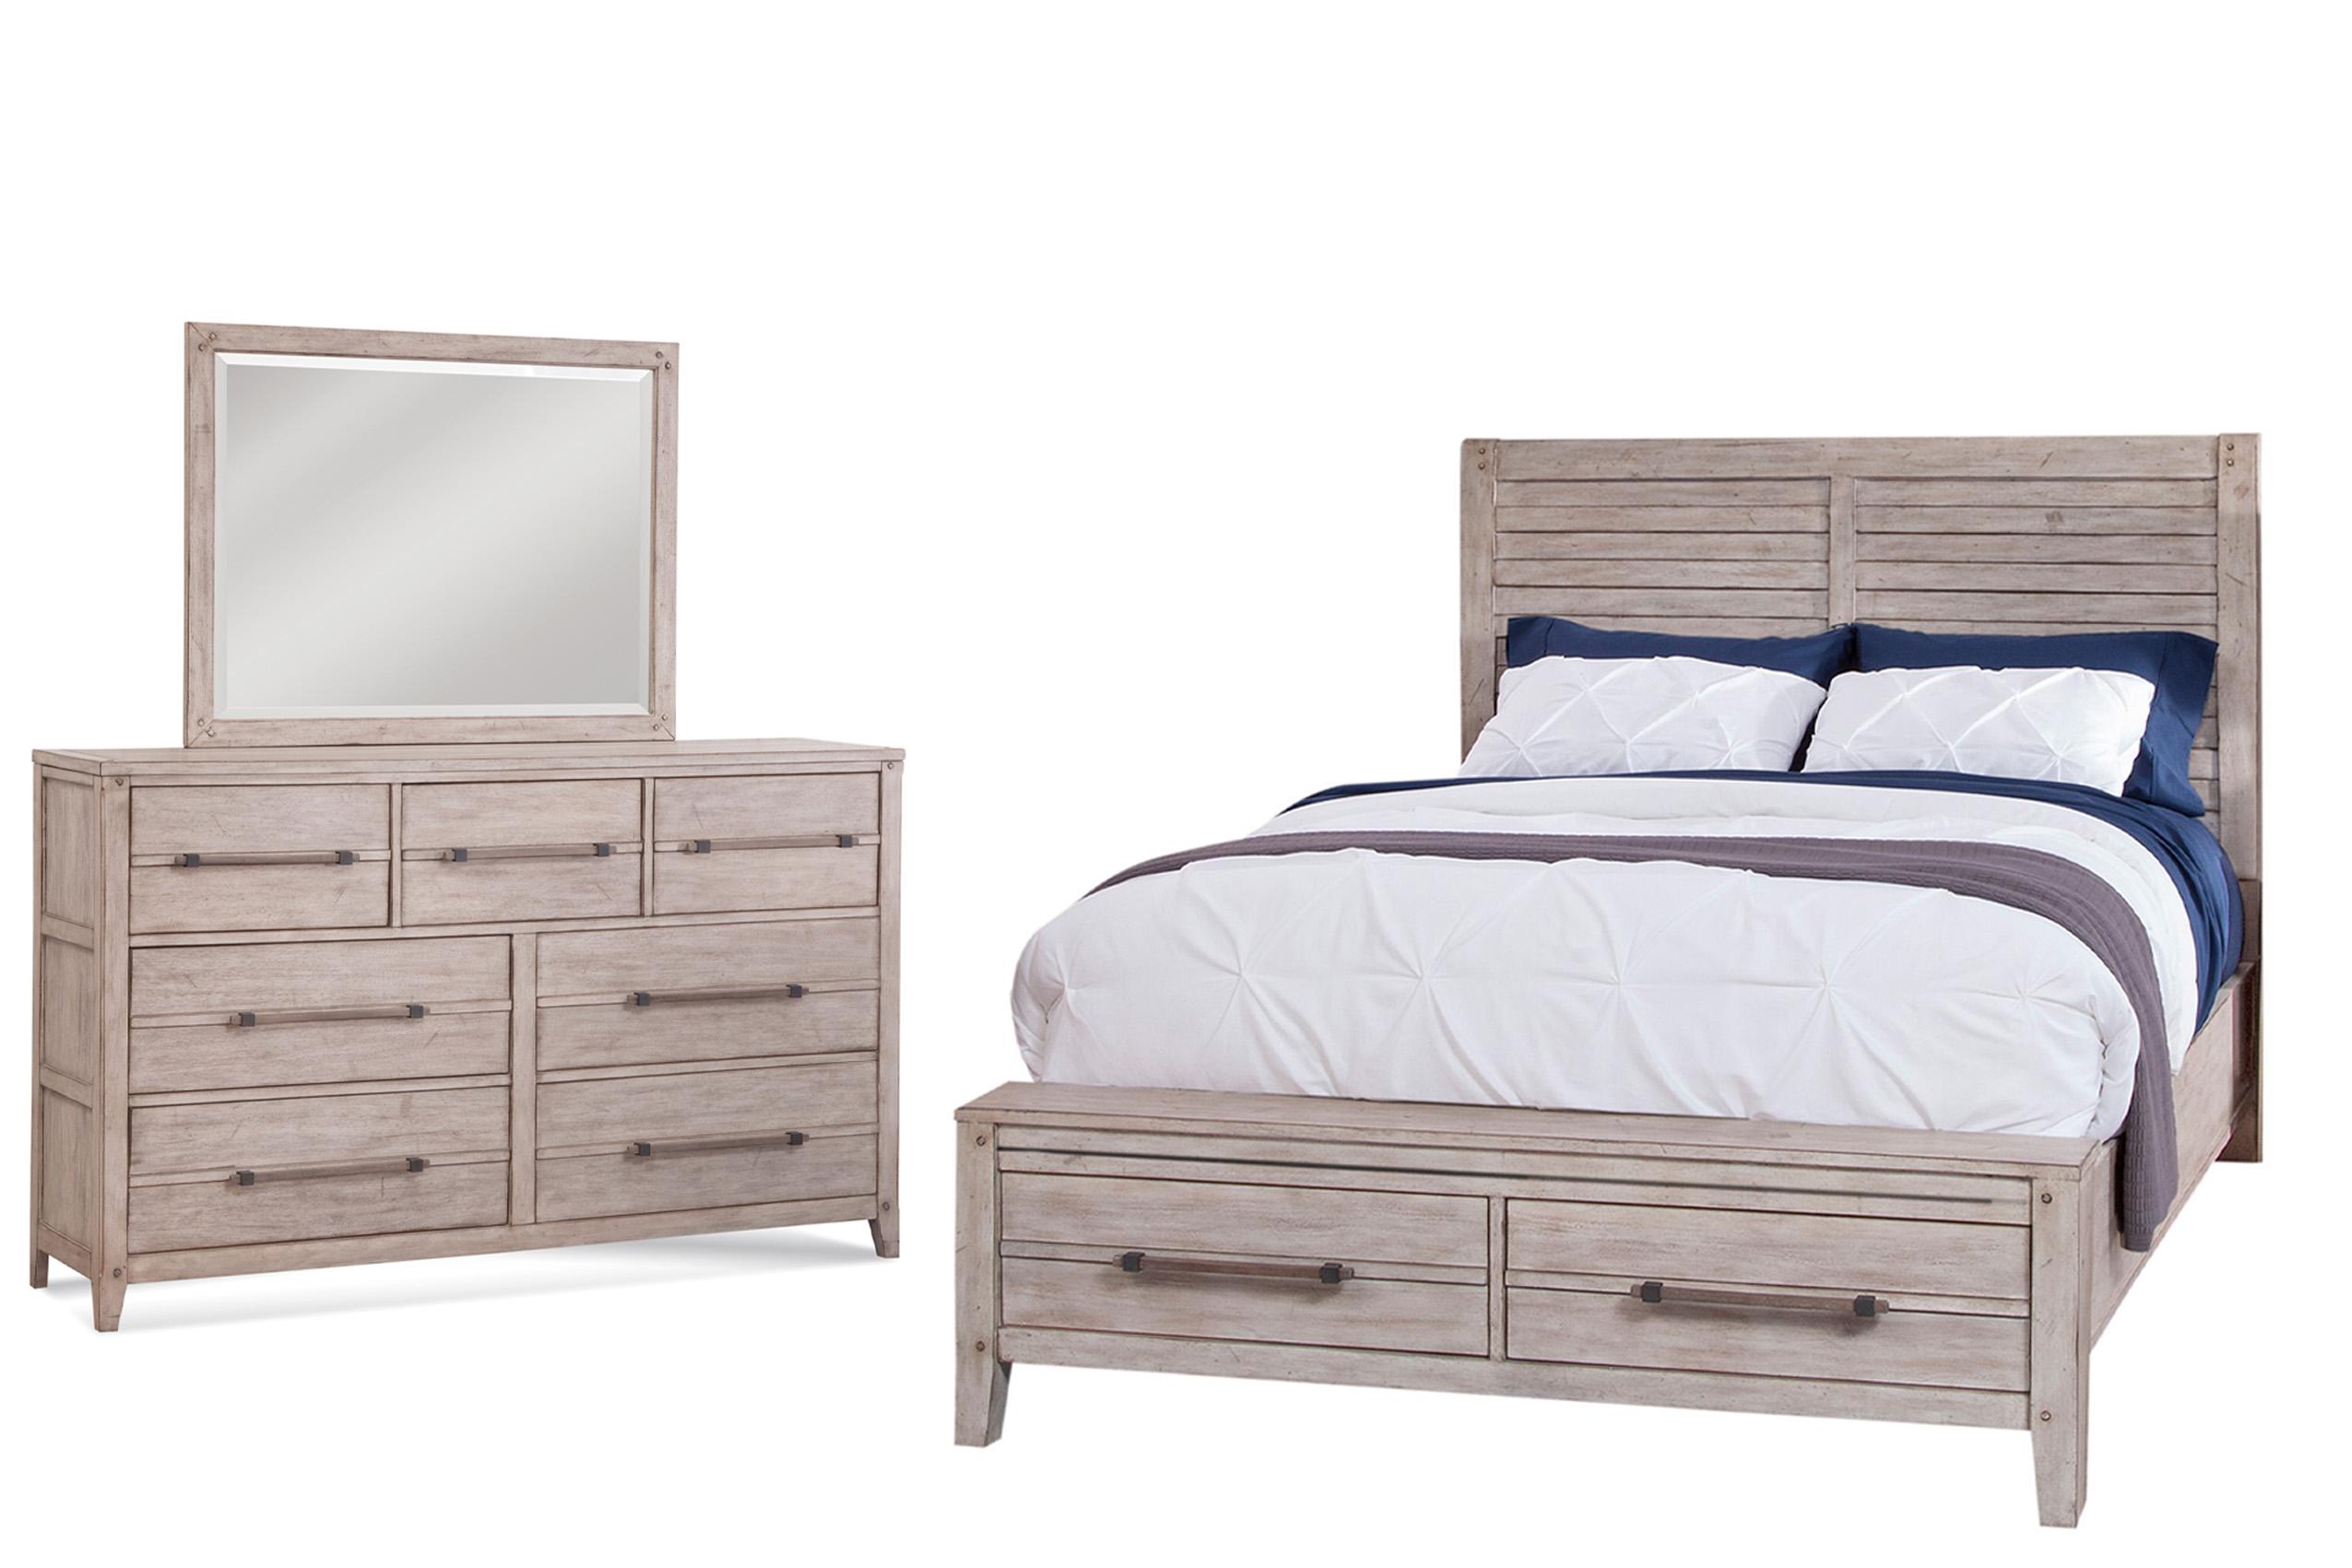 Classic, Traditional Panel Bedroom Set AURORA 2810-50PSB 2810-QPNST-3PC in whitewash 